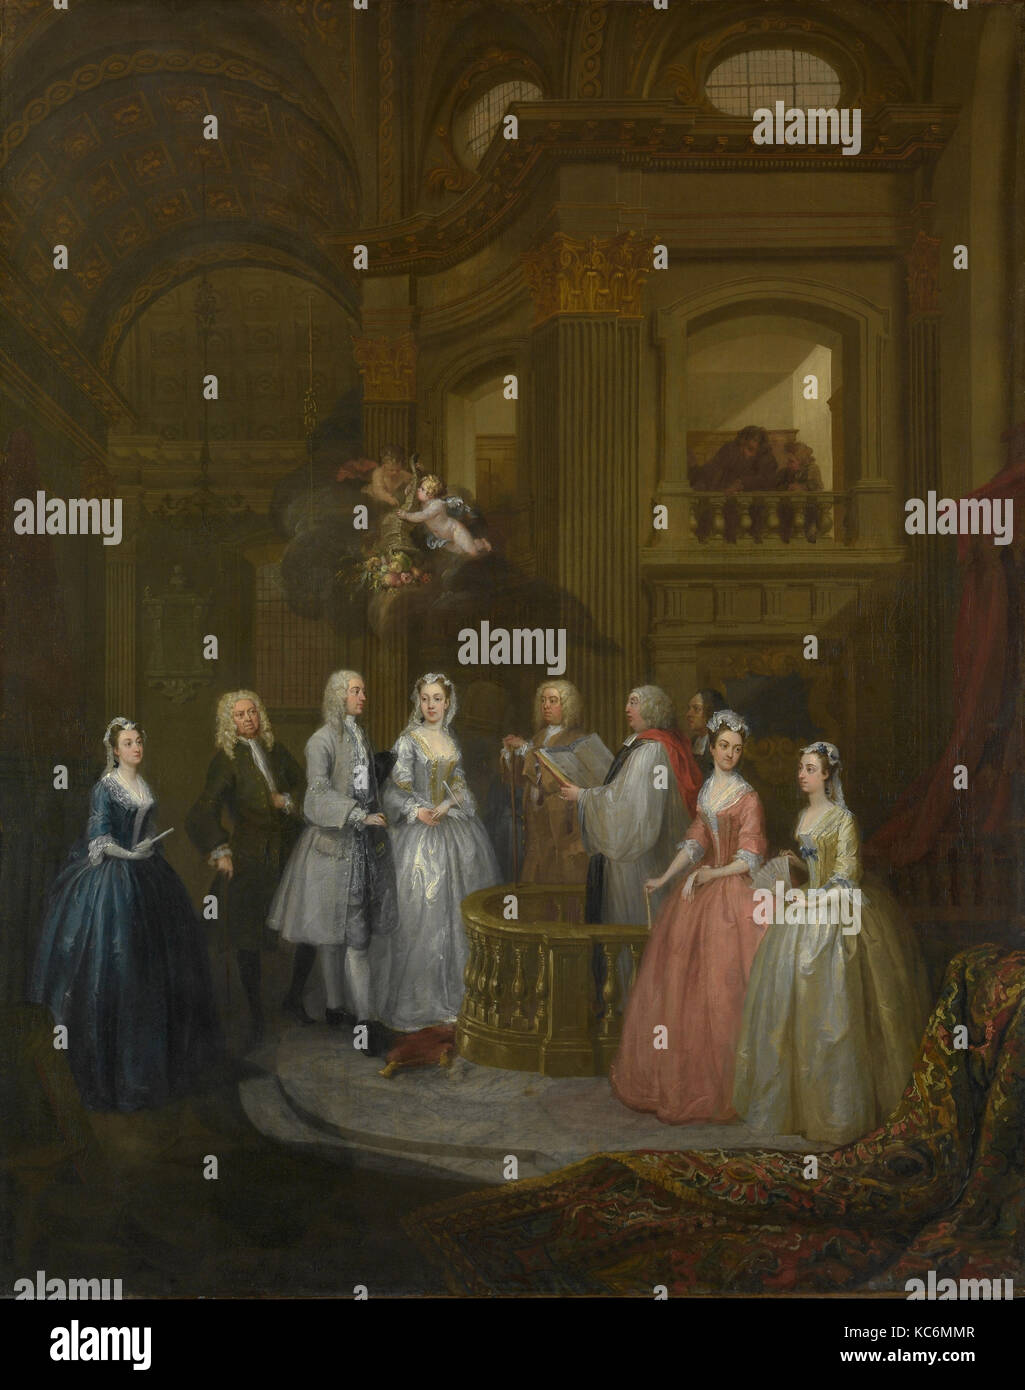 The Wedding of Stephen Beckingham and Mary Cox, William Hogarth, 1729 Stock Photo